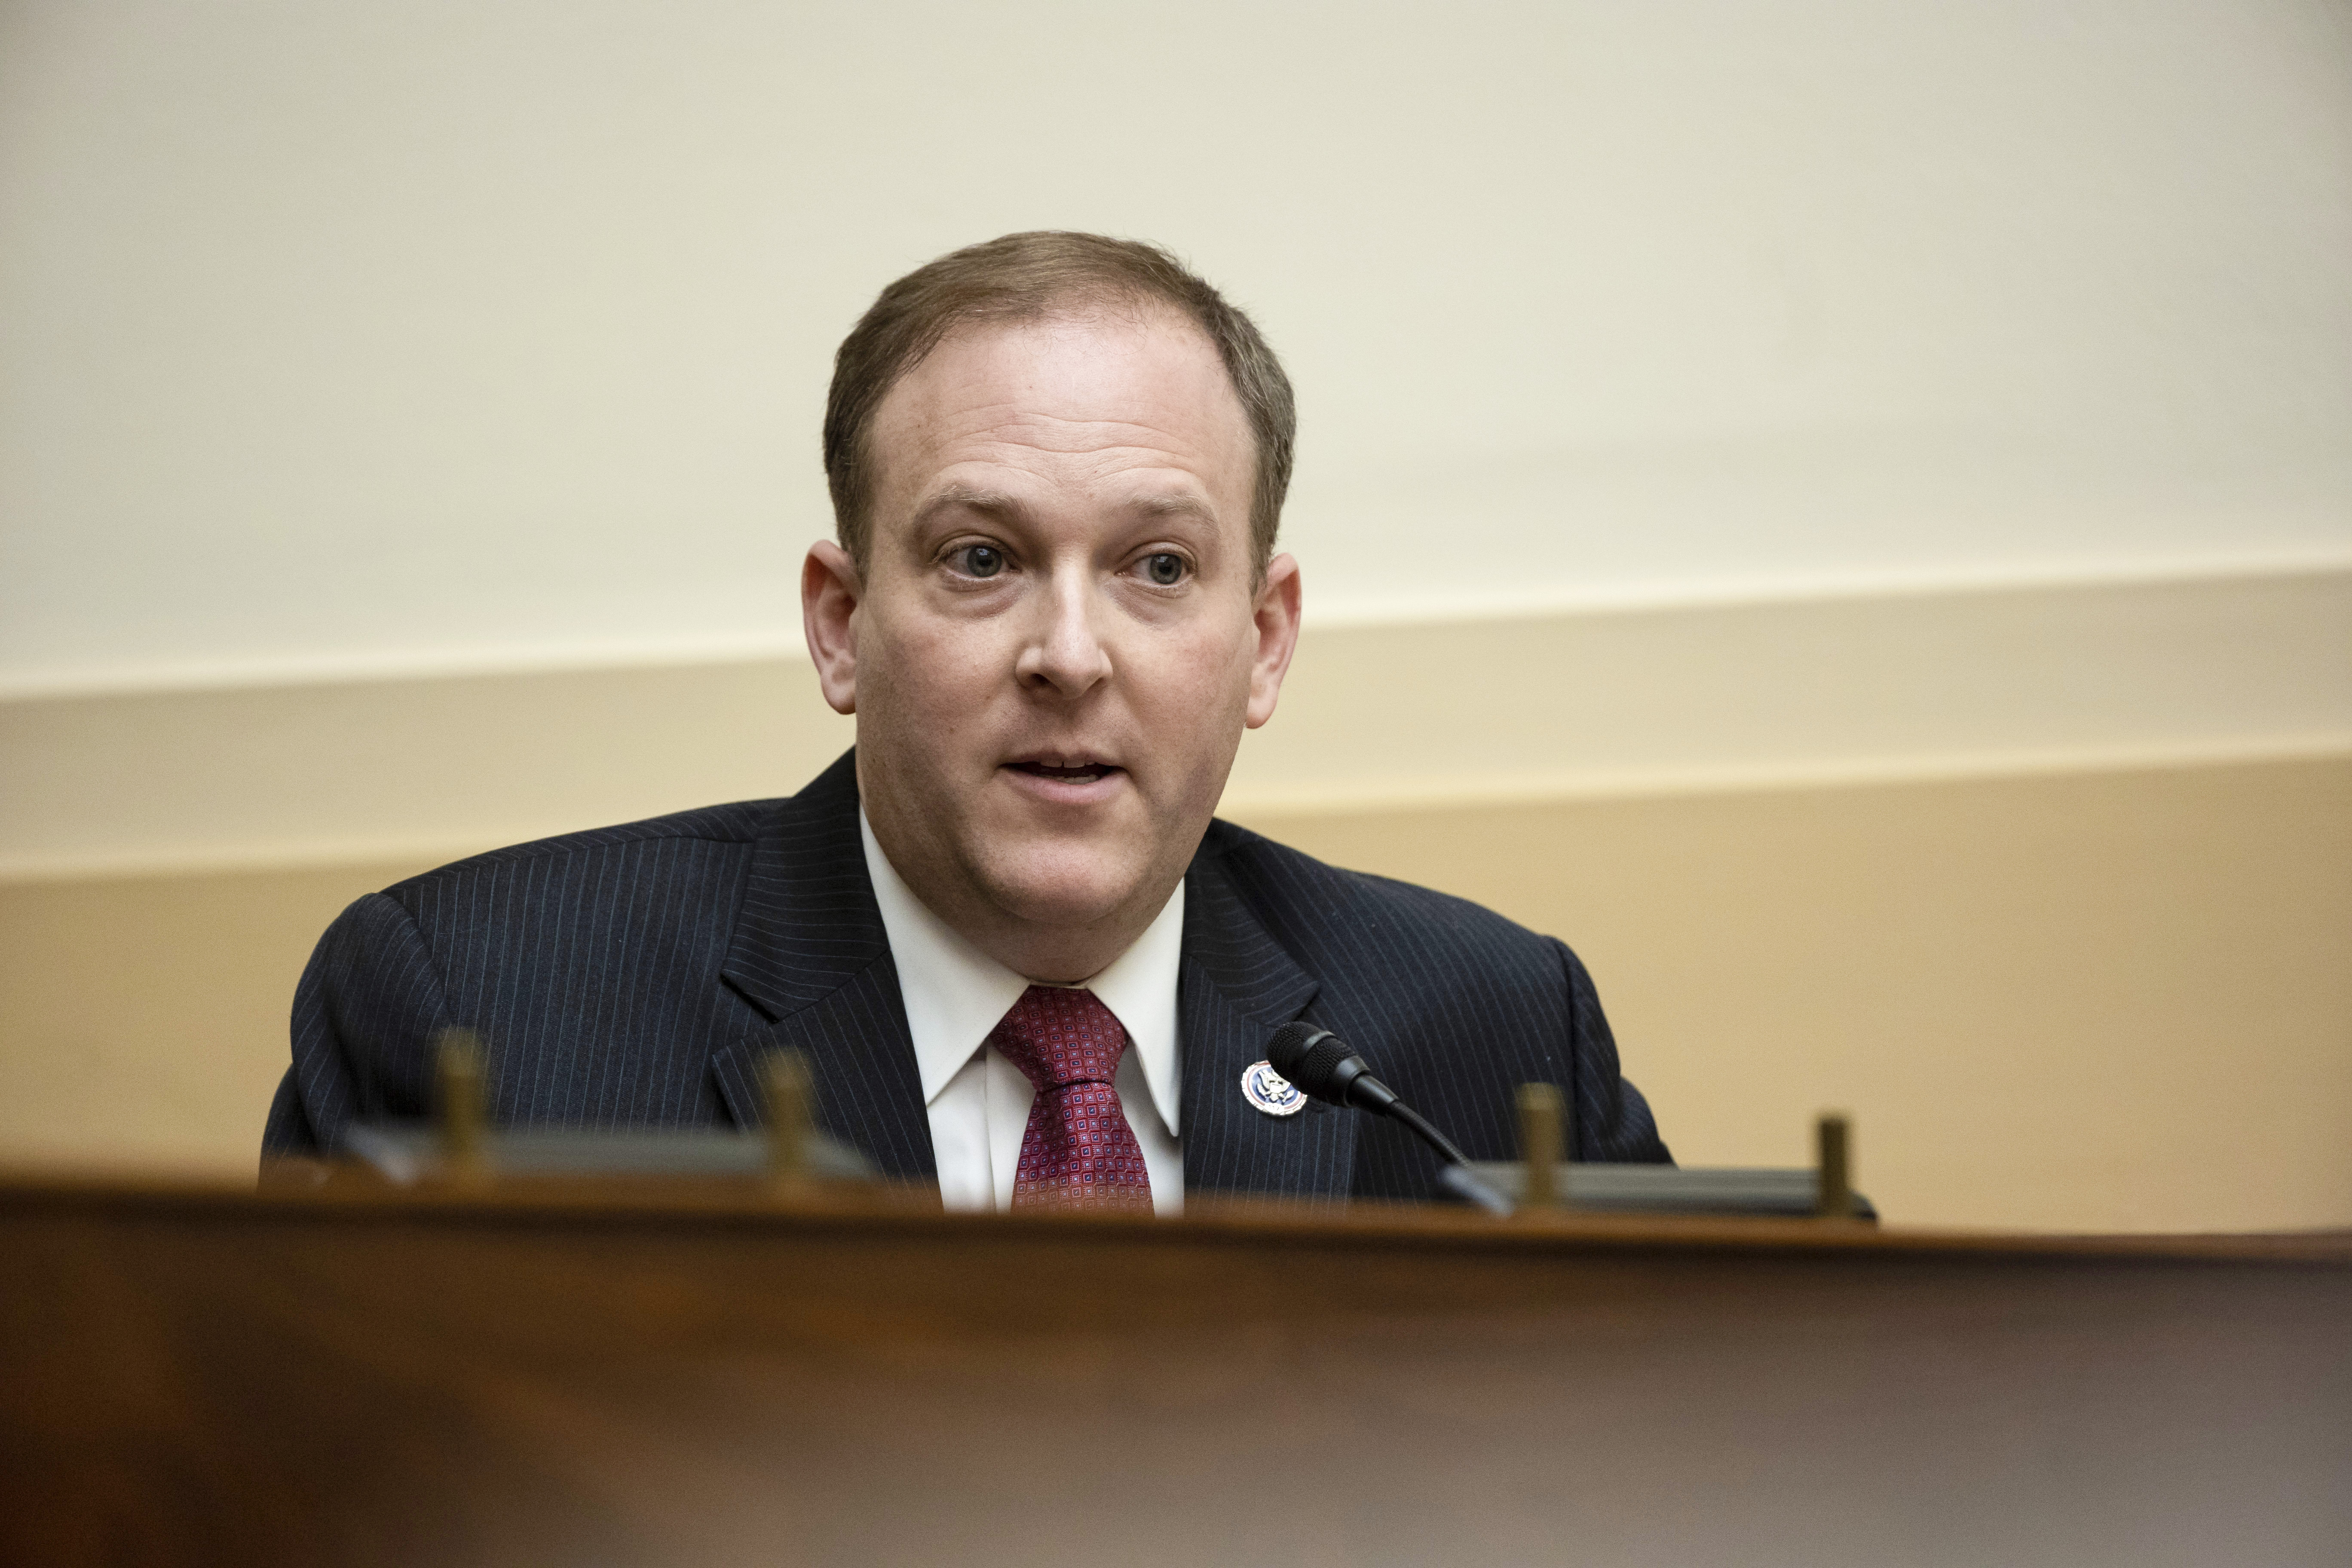 Lee Zeldin easily wins Republican straw poll on NY governor's race -  